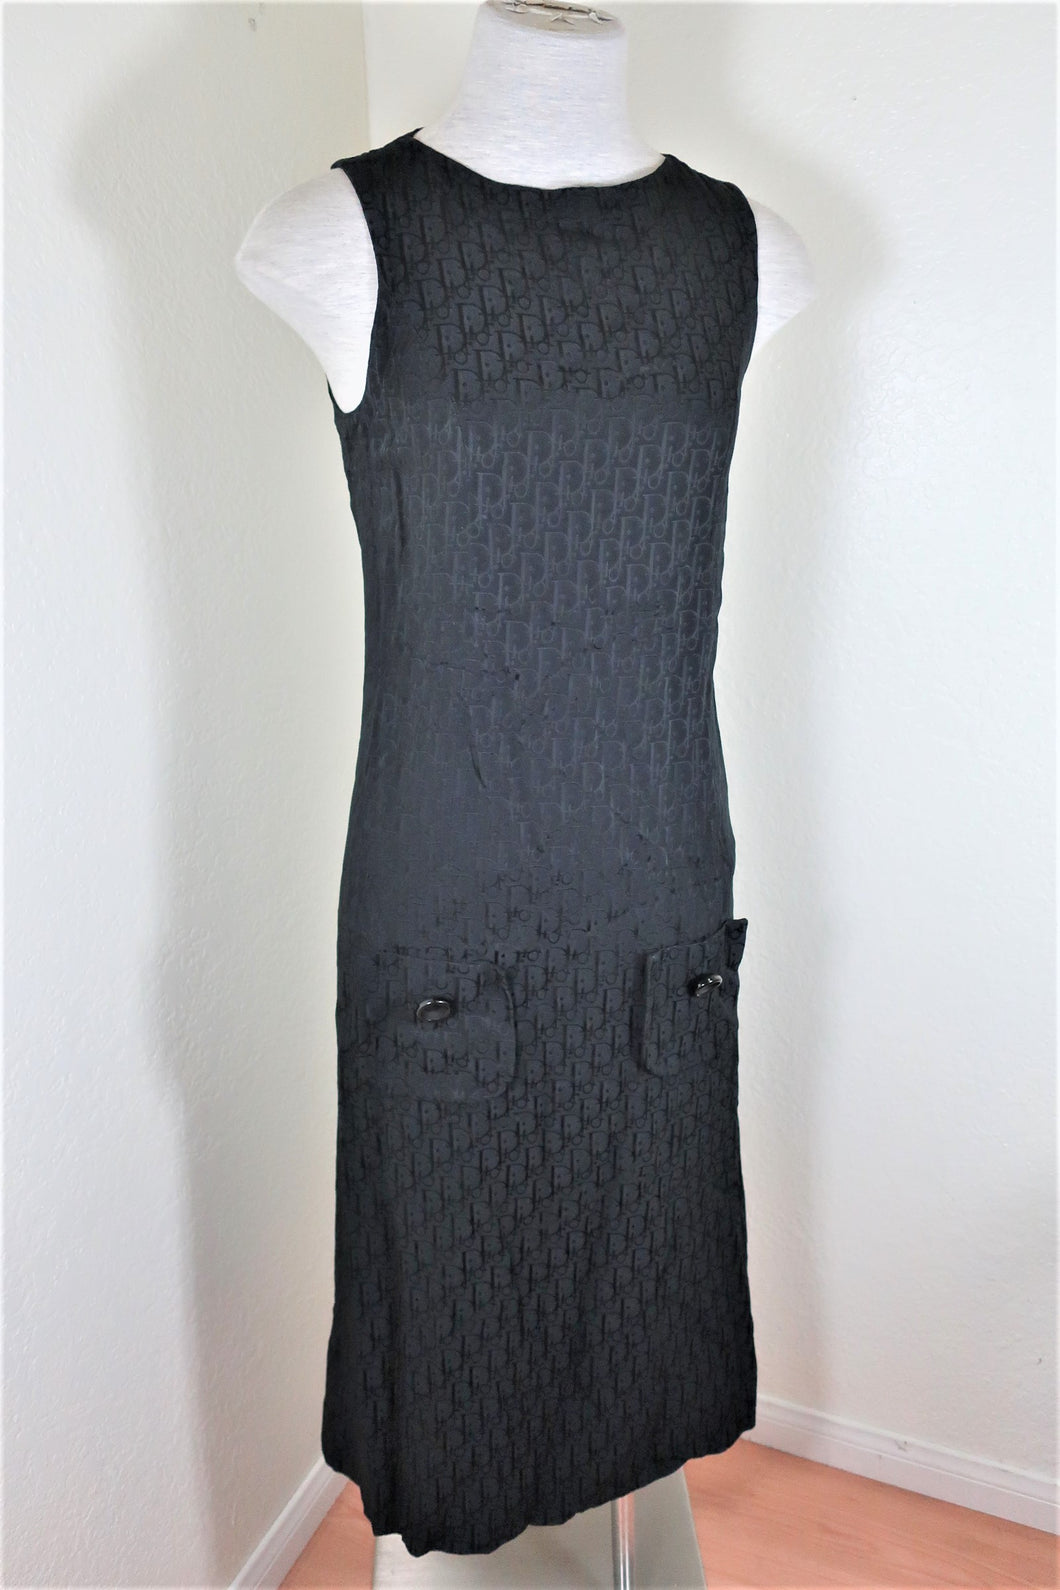 CHRISTIAN DIOR Boutique Rare Black Logo Monograms Sleeveless Long Fitted Dress S Small 2 3 4